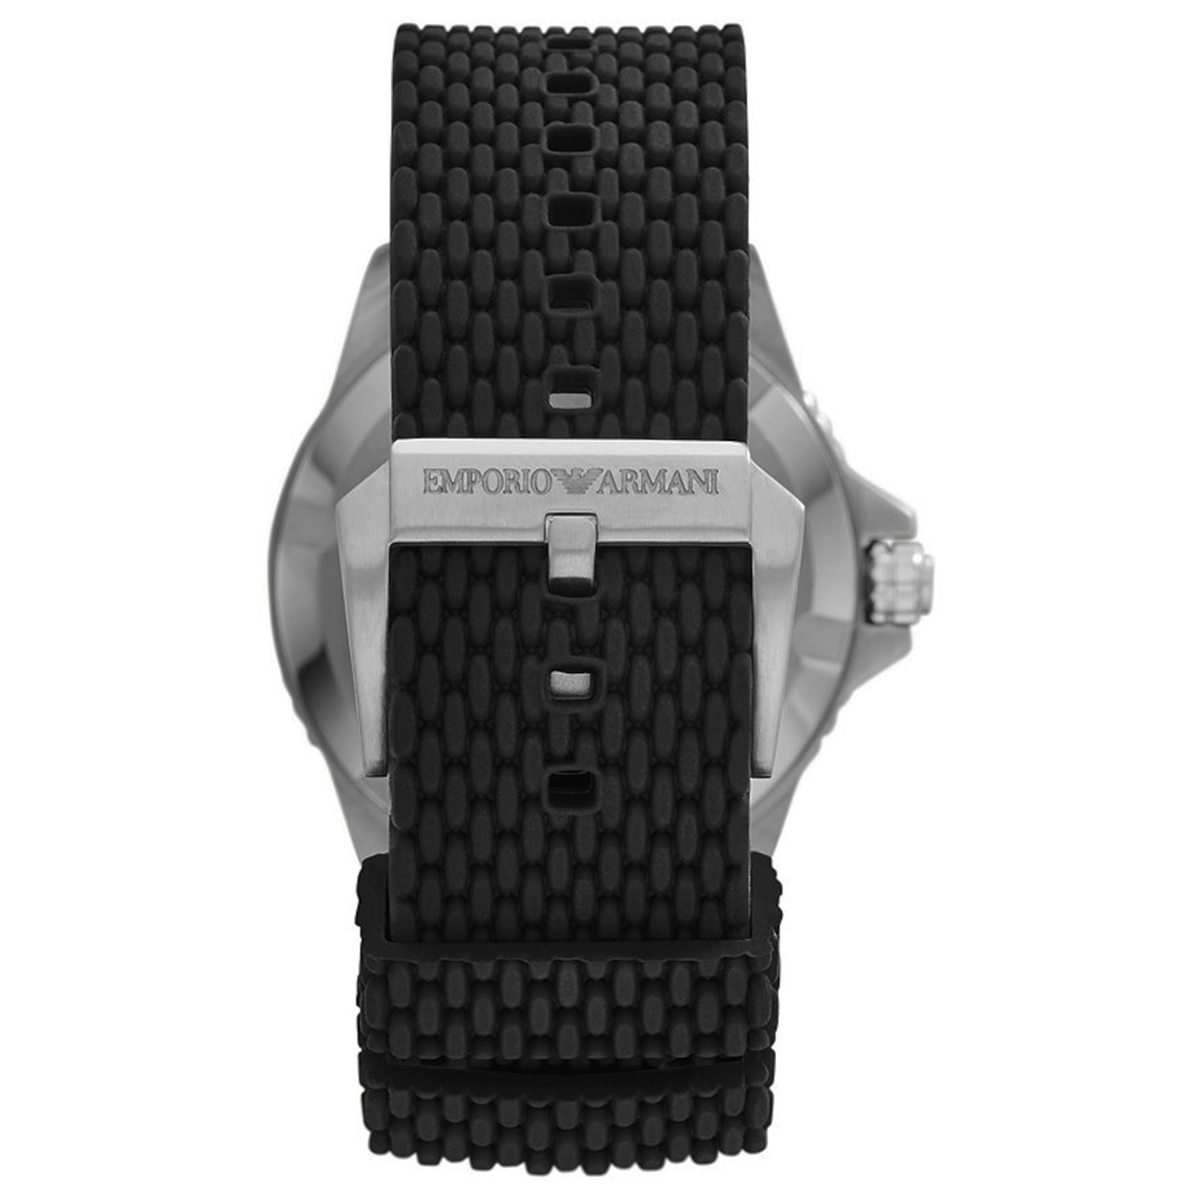 A sporty black dial watch with an interchangeable strap